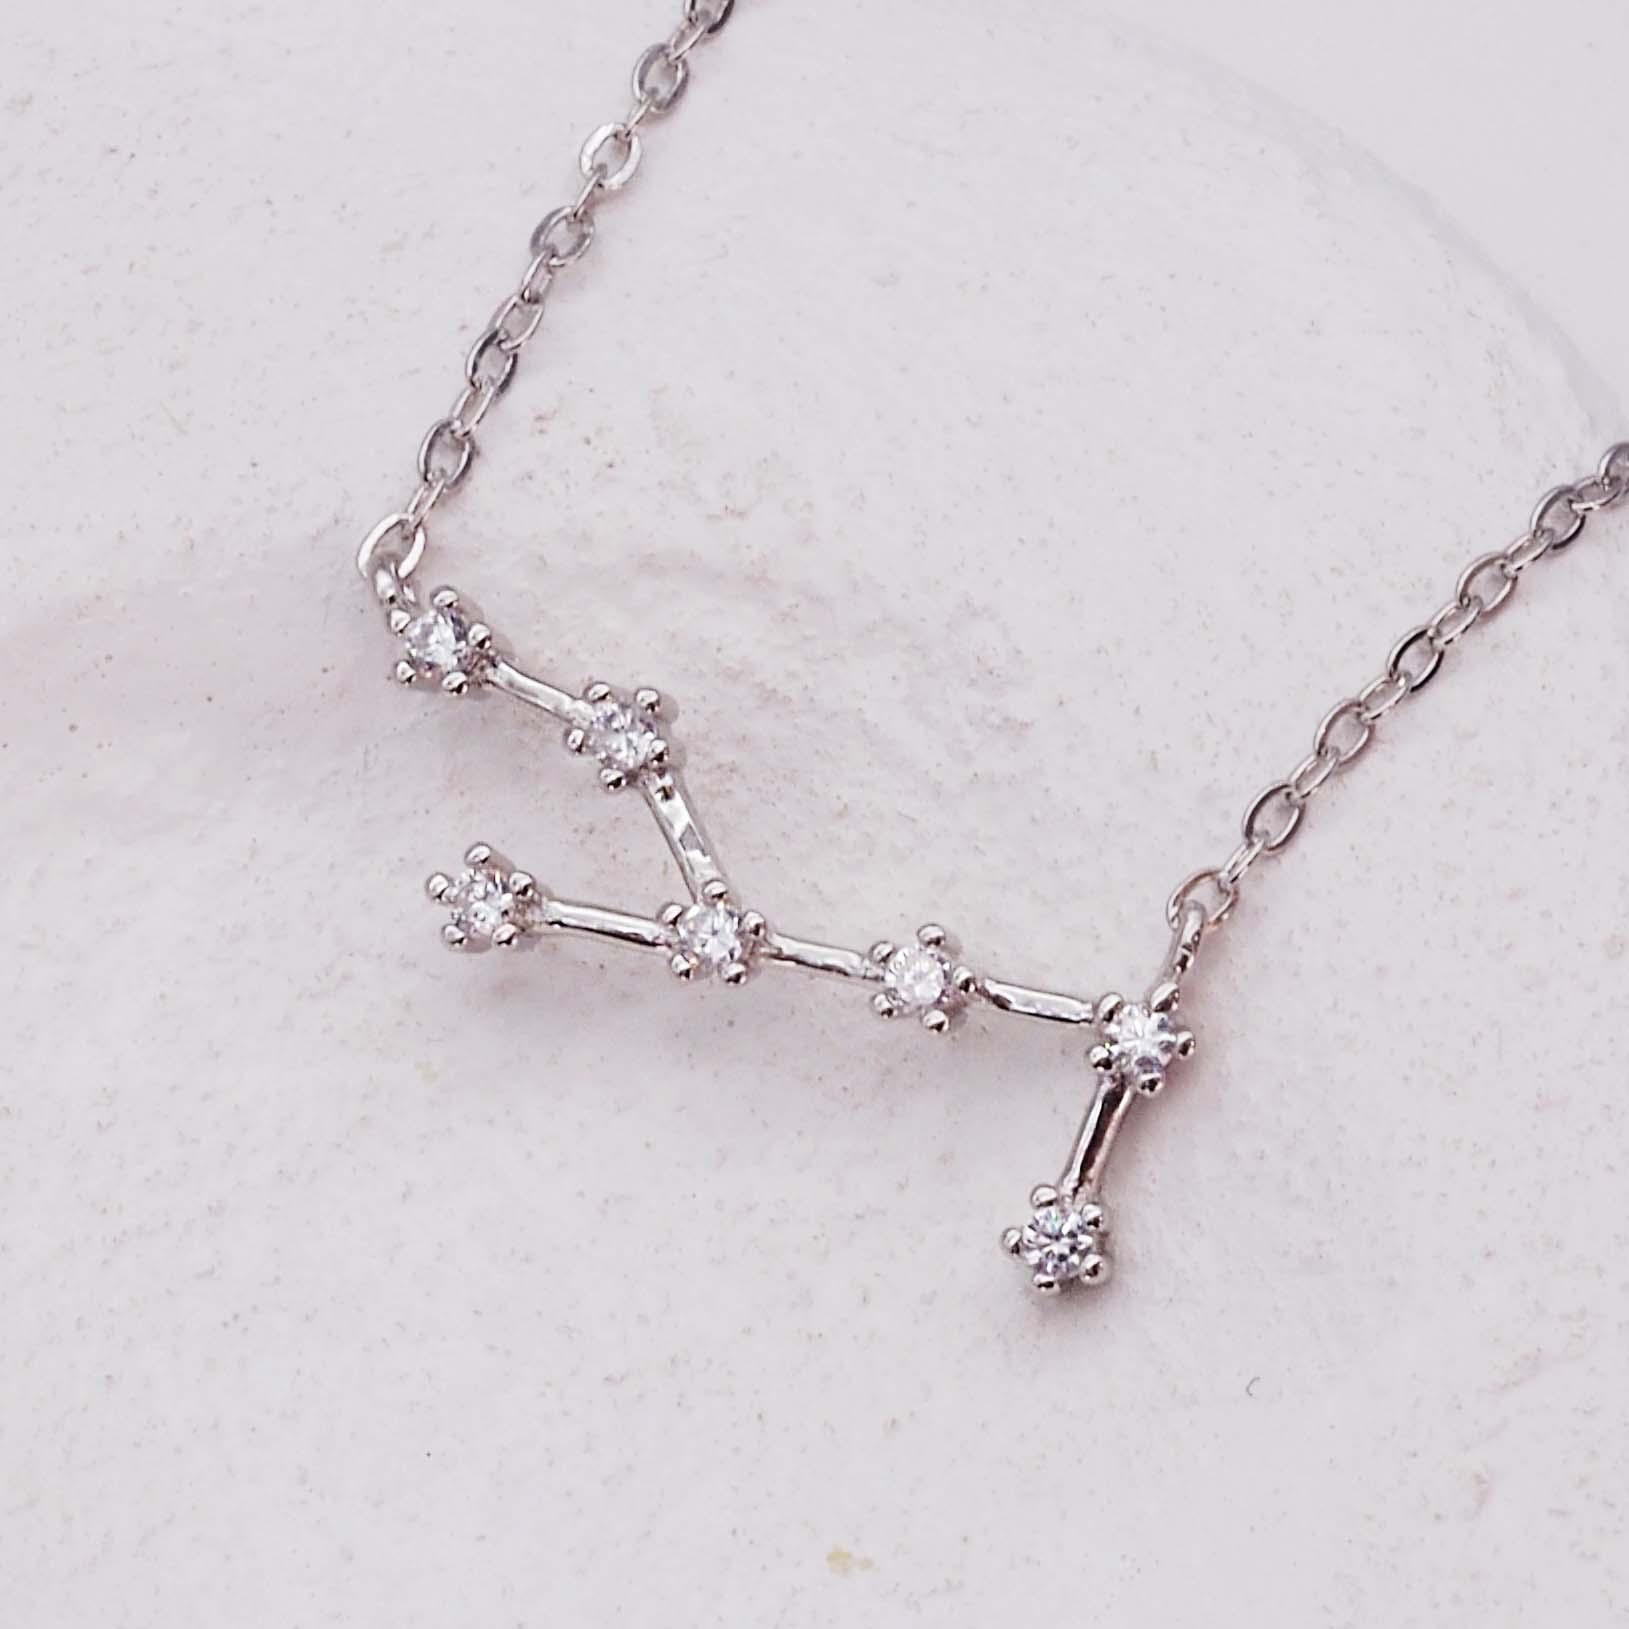 Virgo Constellation Necklace - womens jewellery by indie and harper